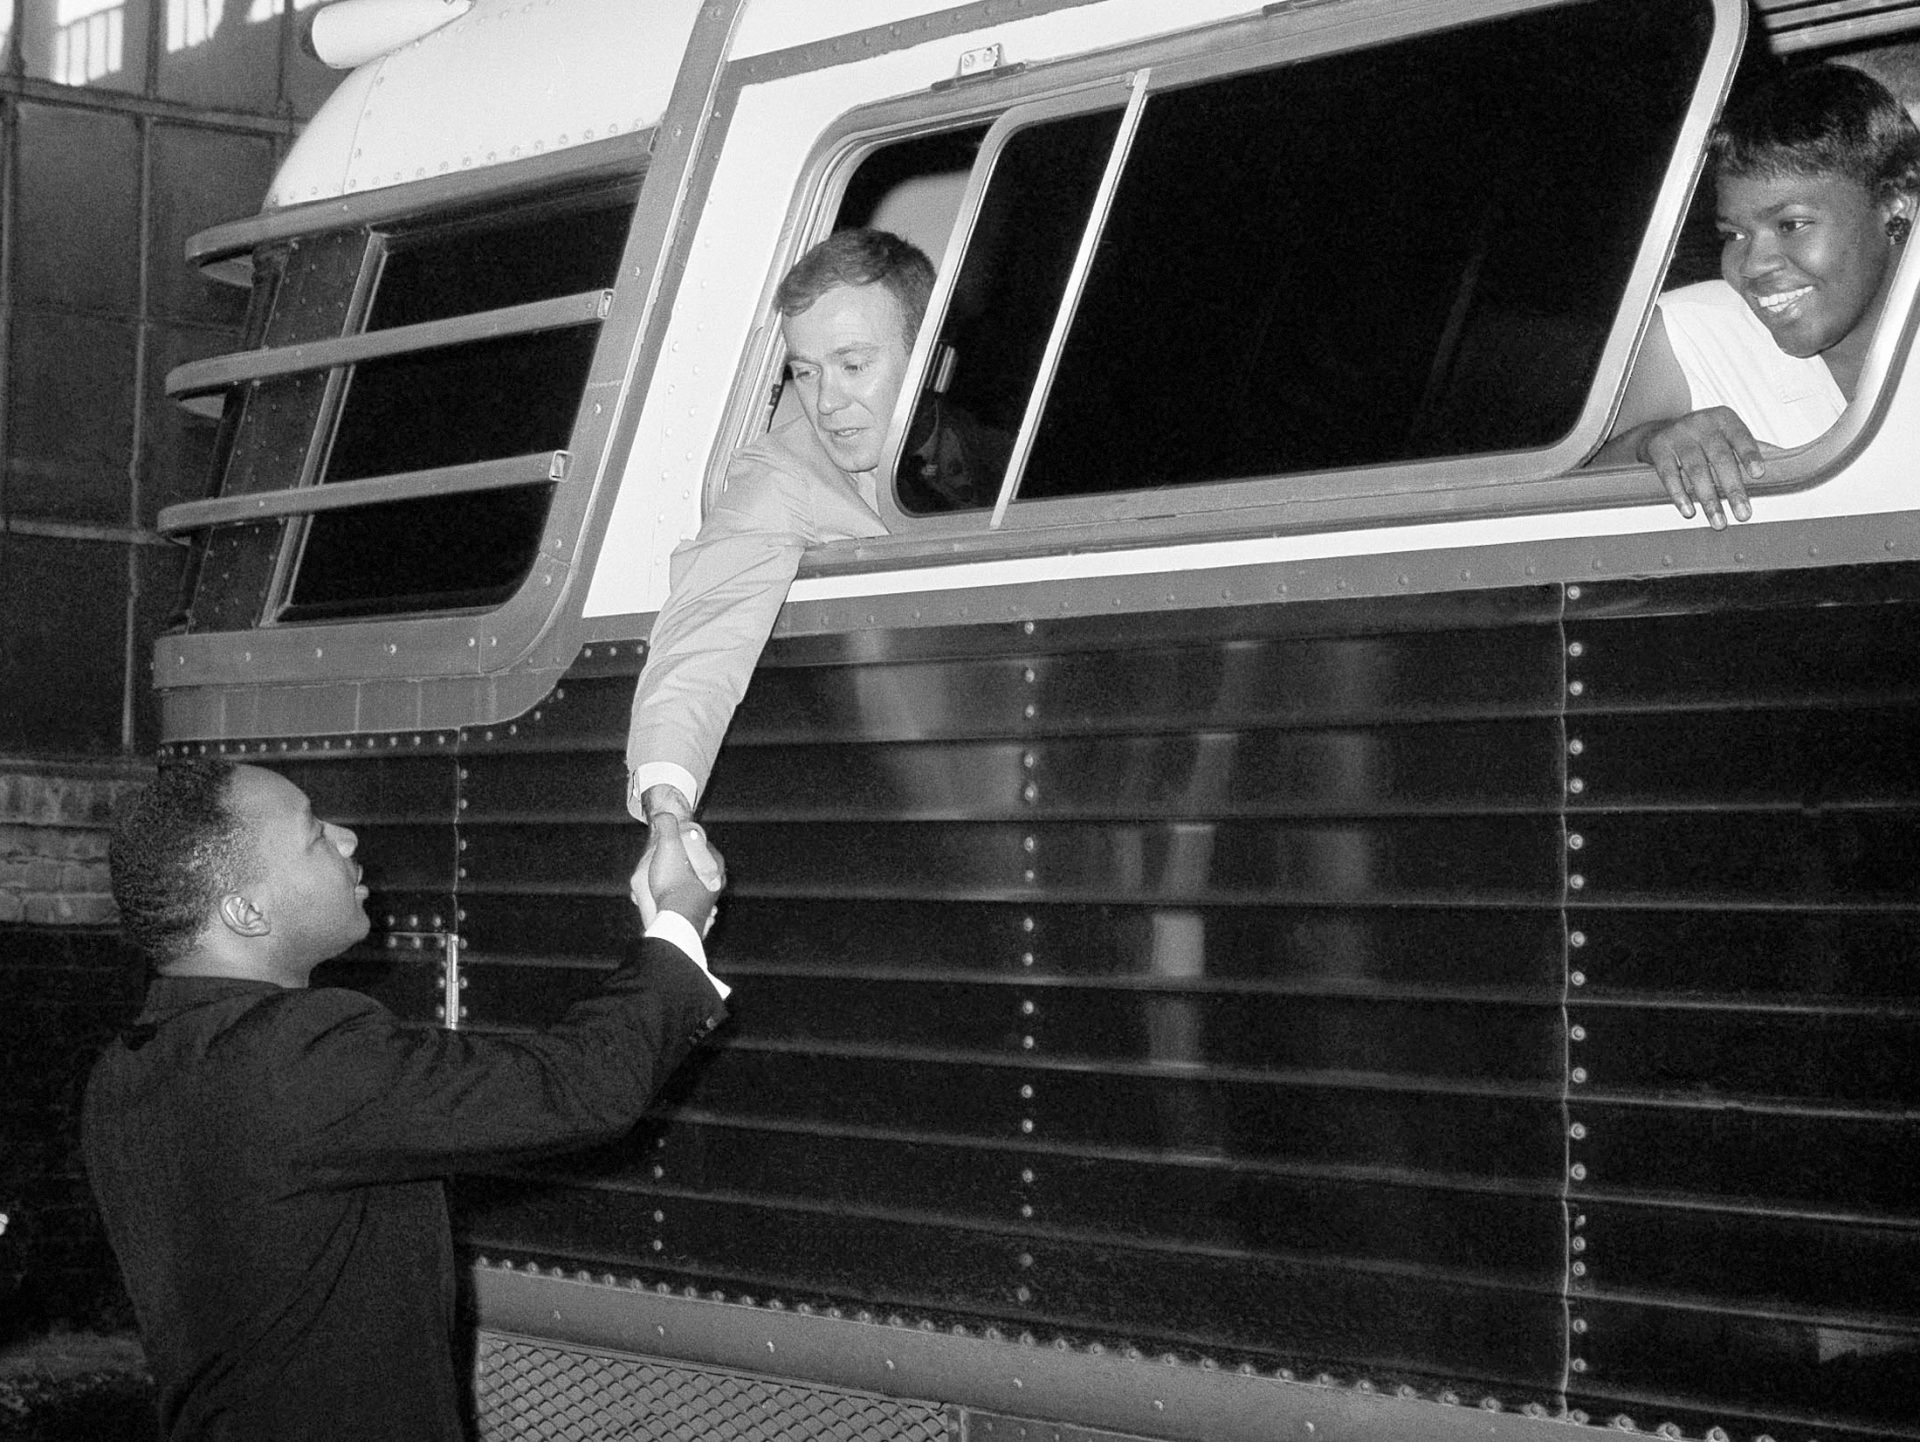 Dr. Martin Luther King Jr., civil rights leader, shakes hands with Paul Dietrich just before a bus of Freedom Riders left Montgomery, Ala., May 24, 1961.